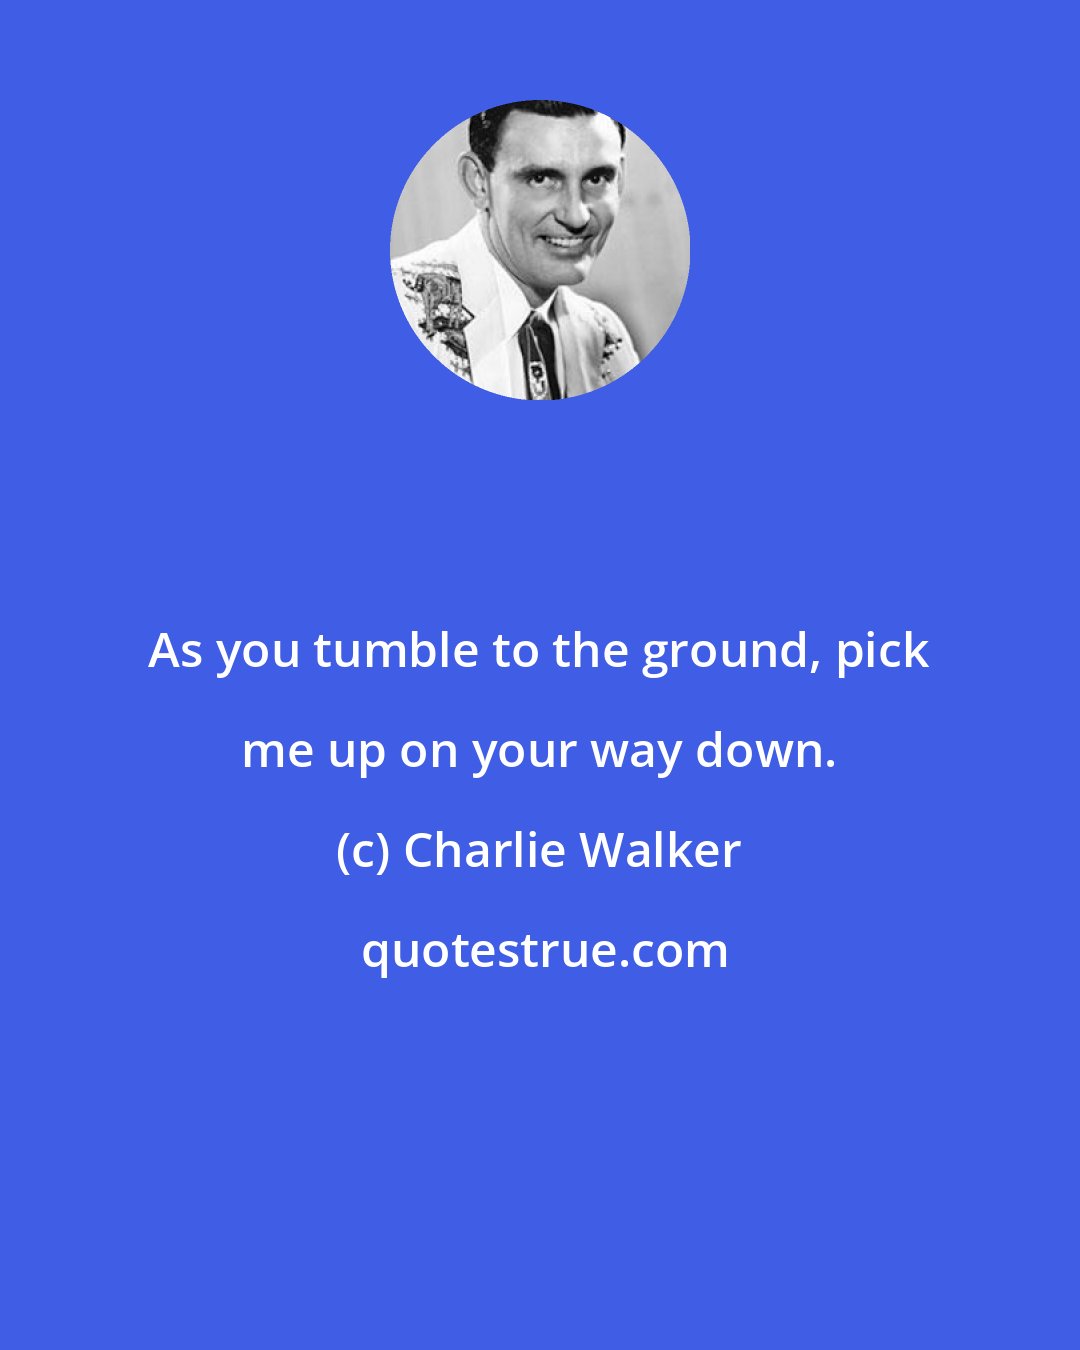 Charlie Walker: As you tumble to the ground, pick me up on your way down.